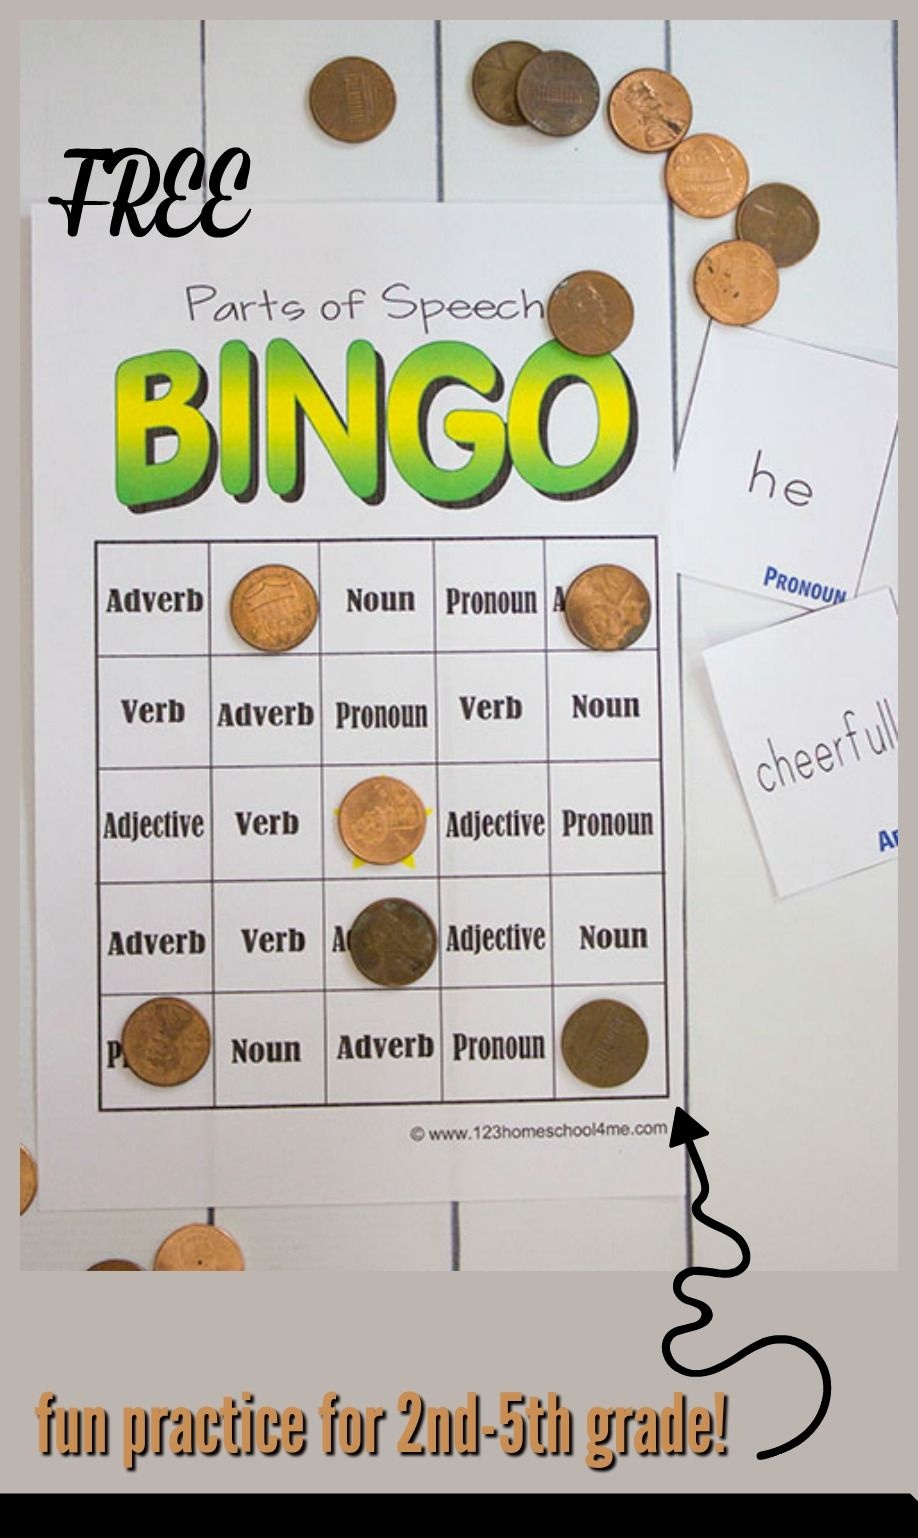 Free Parts Of Speech Game | Education | Parts Of Speech Games, Parts - Free Printable Parts Of Speech Bingo